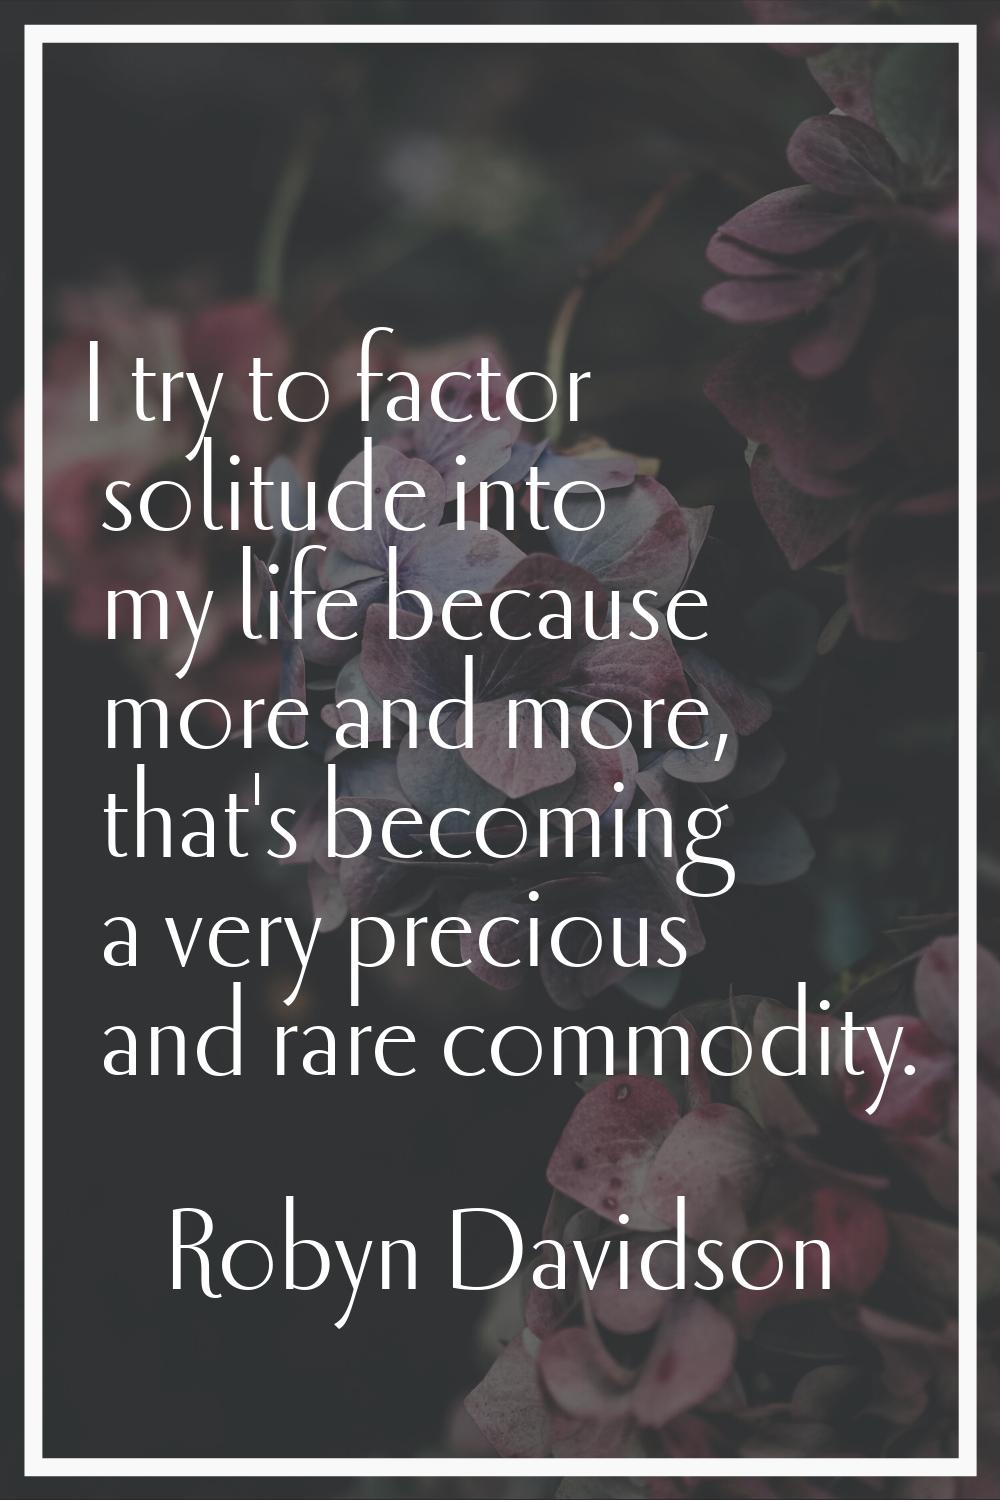 I try to factor solitude into my life because more and more, that's becoming a very precious and ra